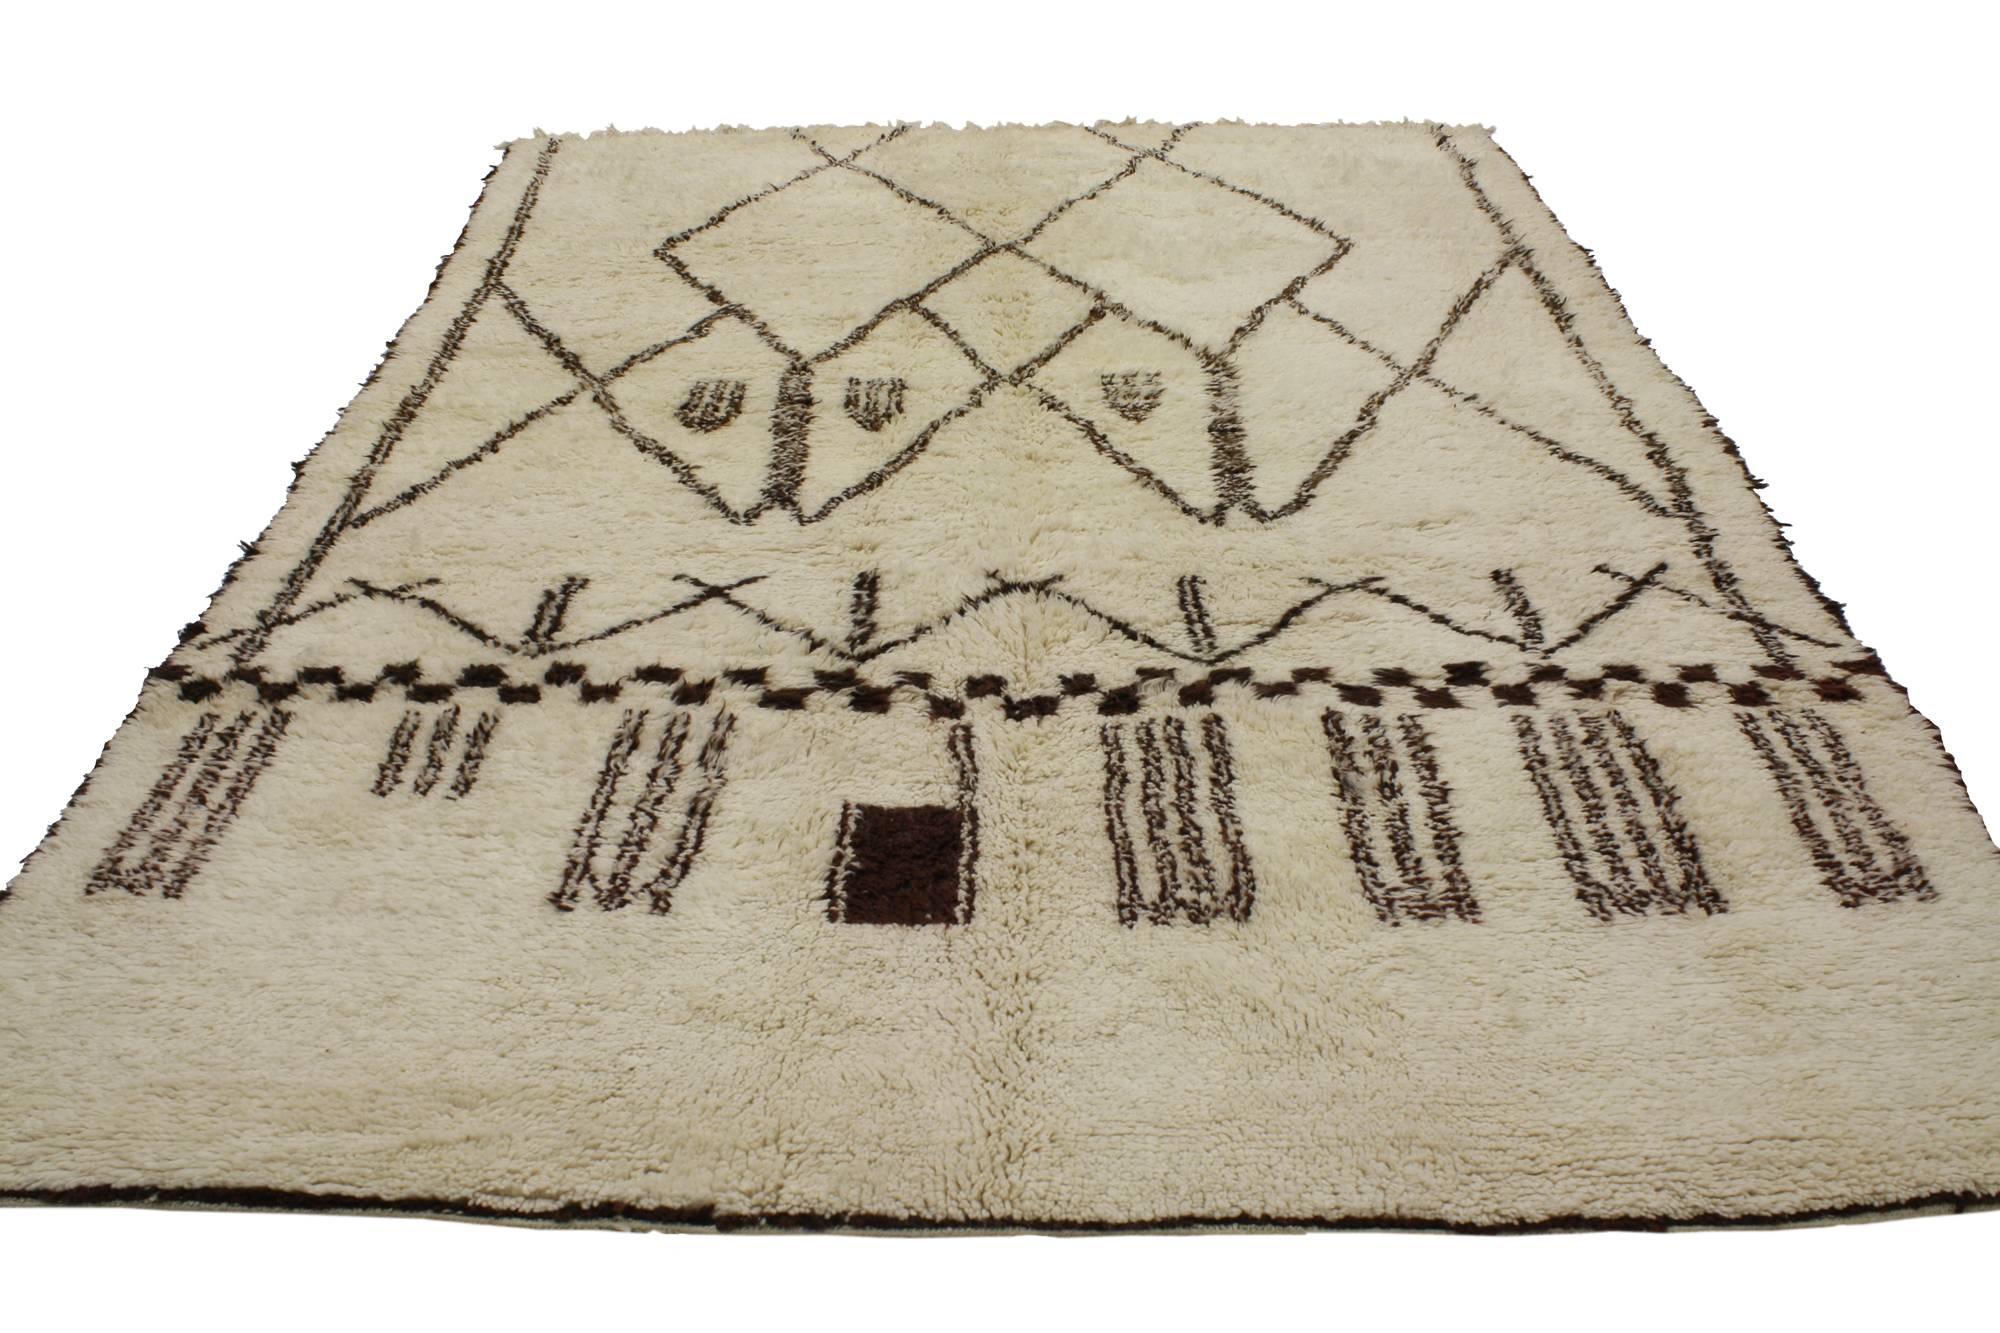 20355 Contemporary Berber Moroccan rug with modern style. With a distinctive tribal design and modern style, this contemporary Berber Moroccan rug displays geometric shapes galore, from diamonds to rods and a checkerboard pattern. More than the